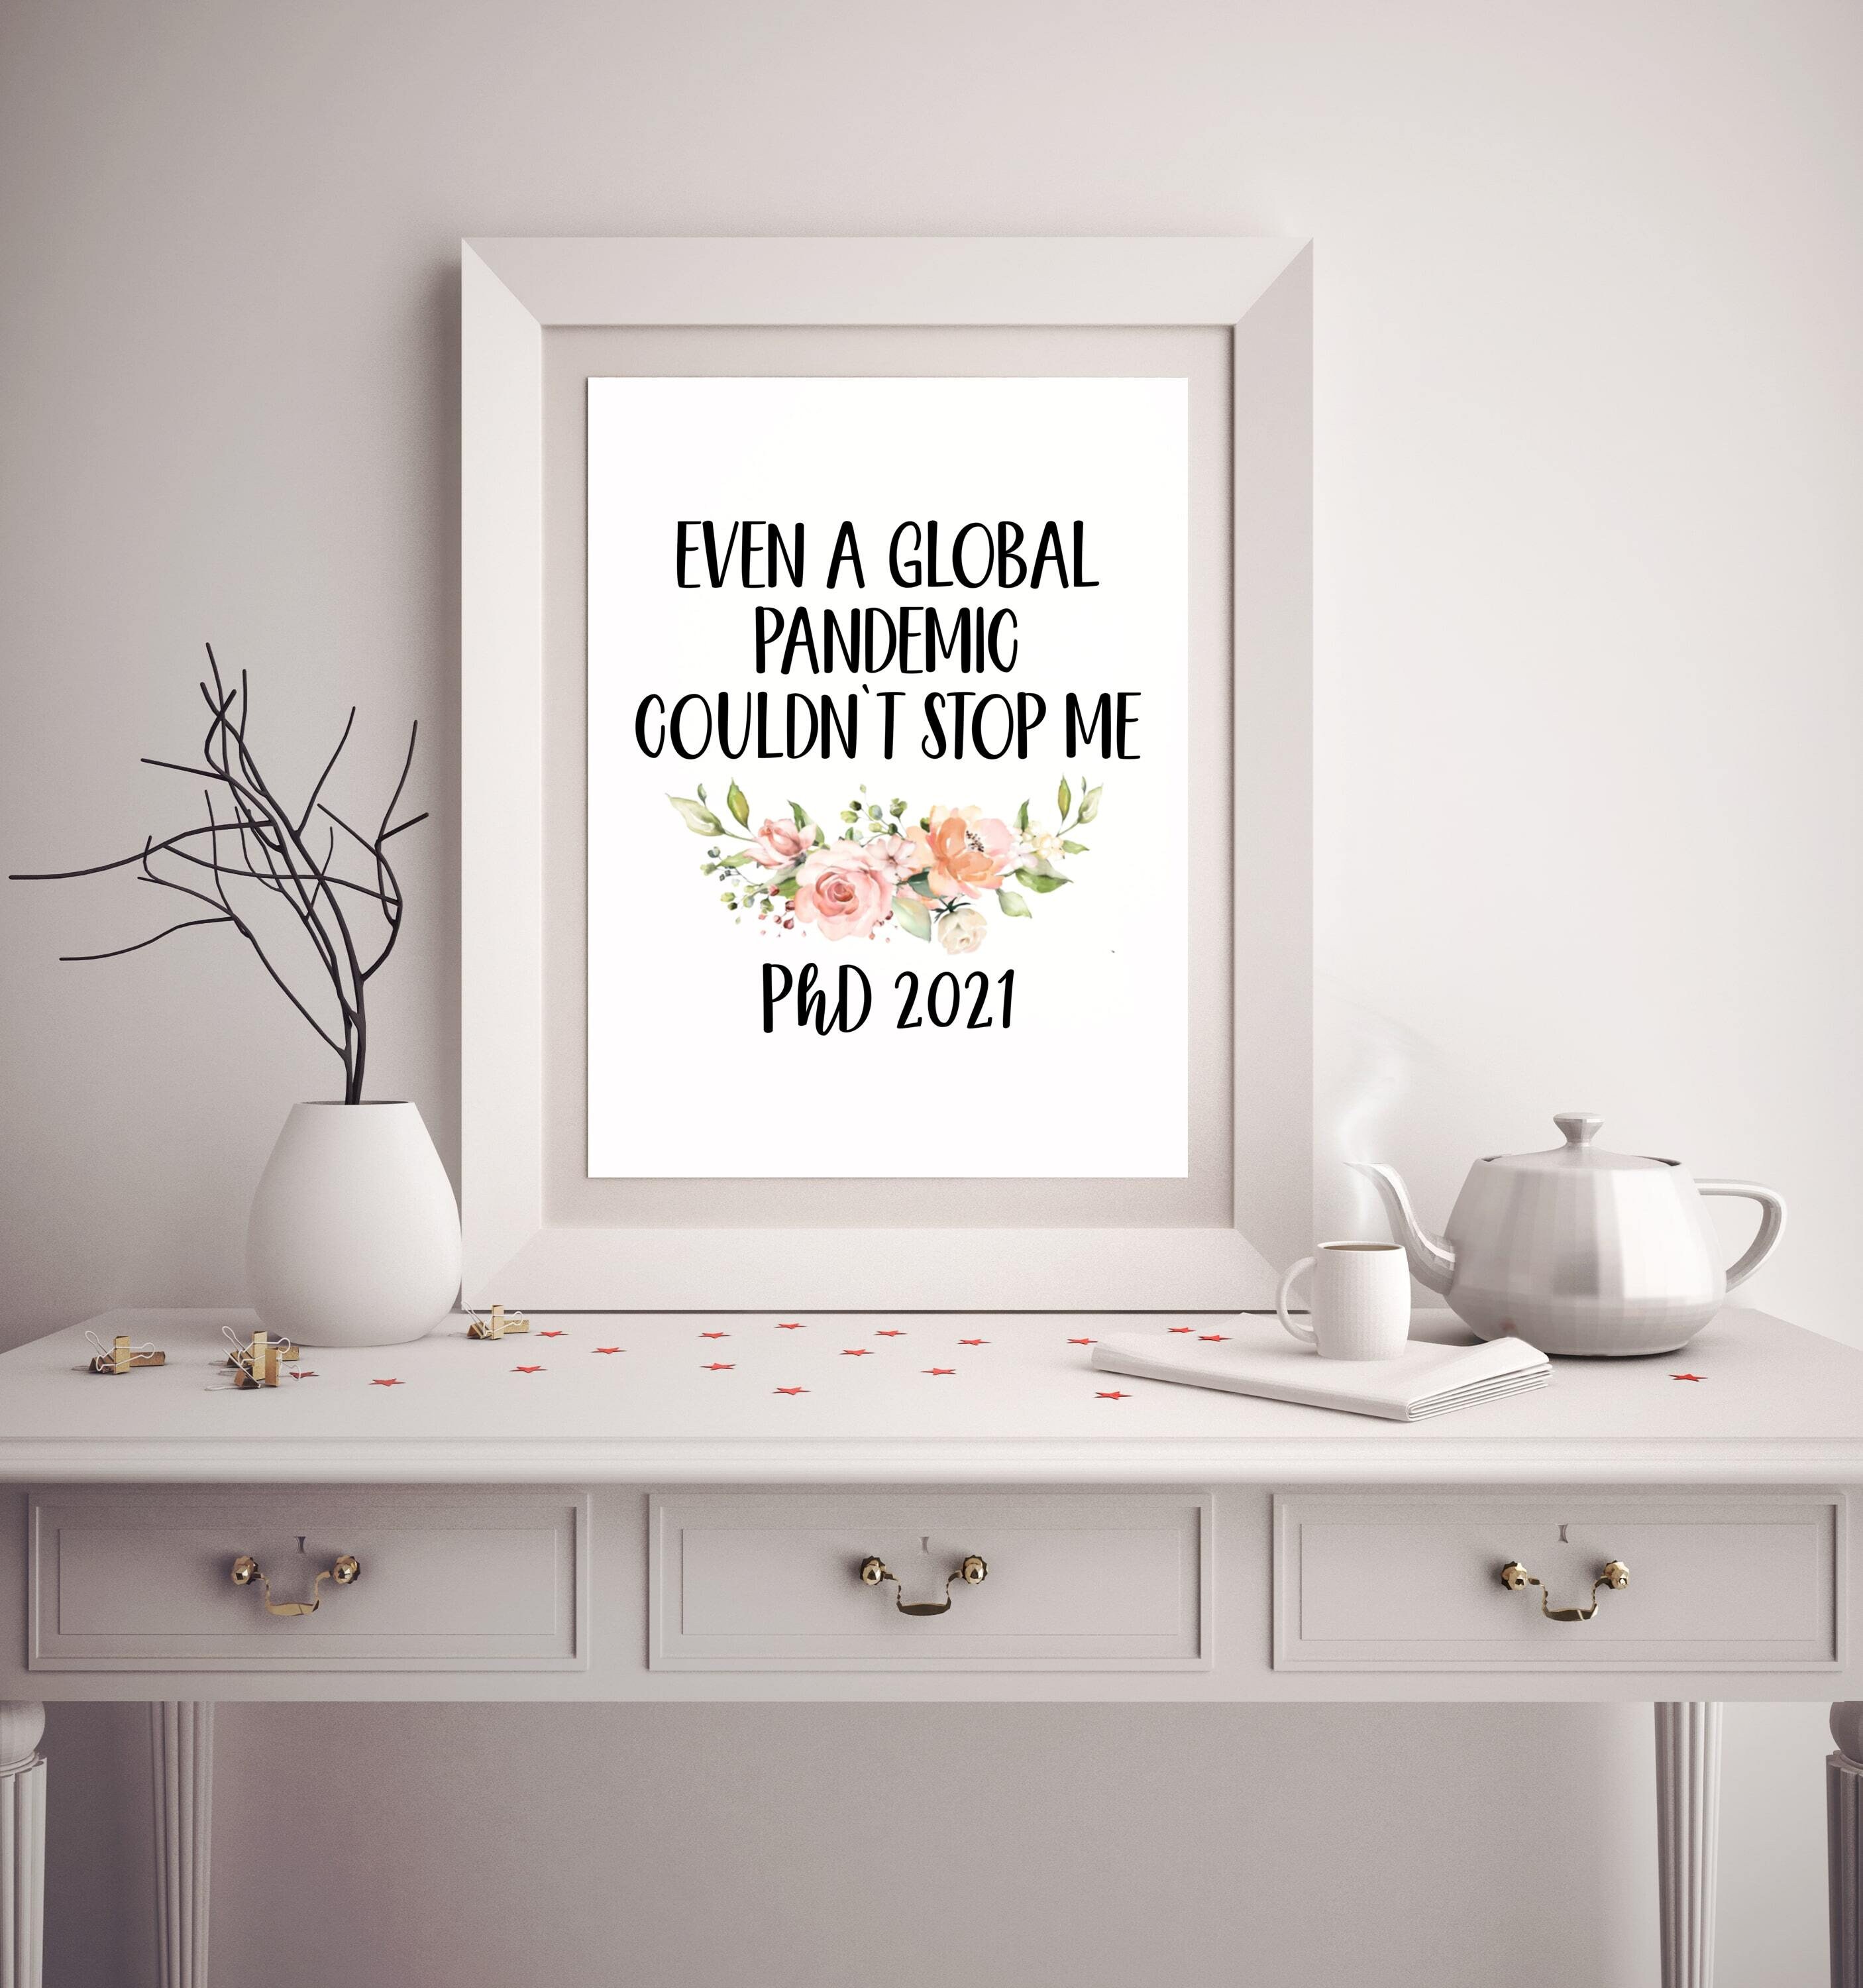 Phd Graduation Poster Even A Global Pandemic Couldnt Stop Me | Etsy